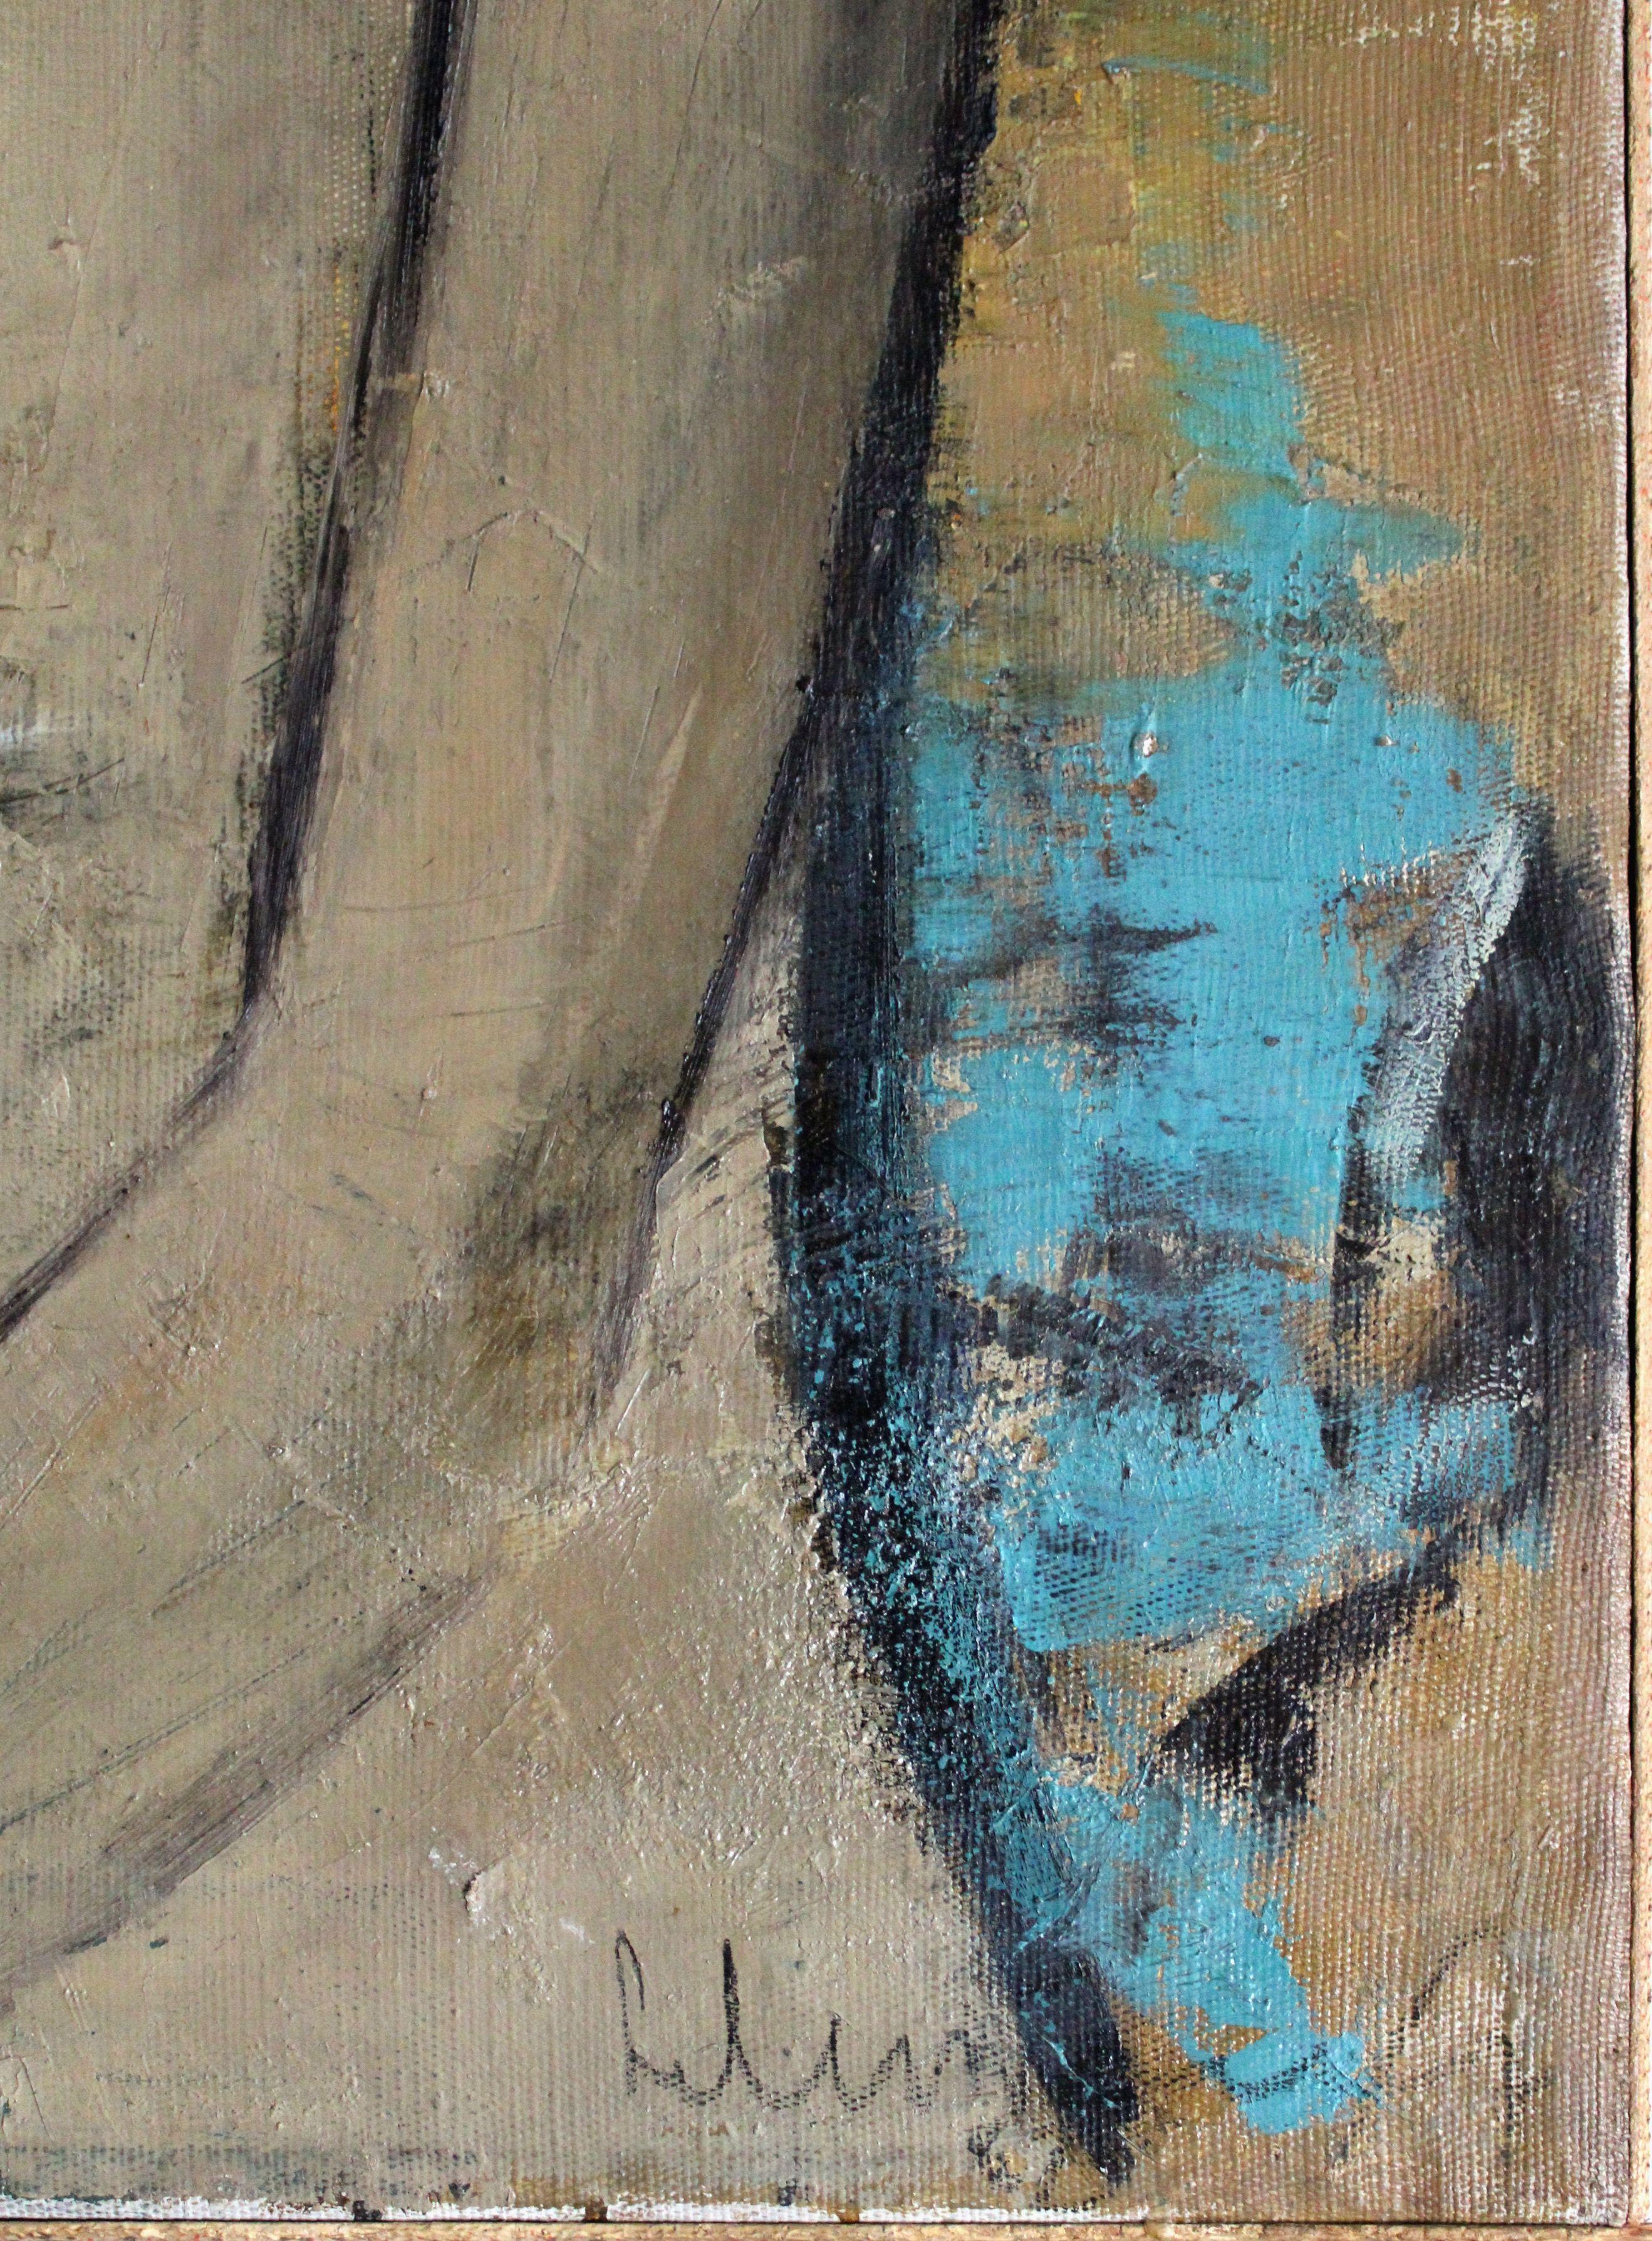 A woman. 1962. Oil on canvas, 80x60 cm  - Modern Painting by Laimdots Murnieks